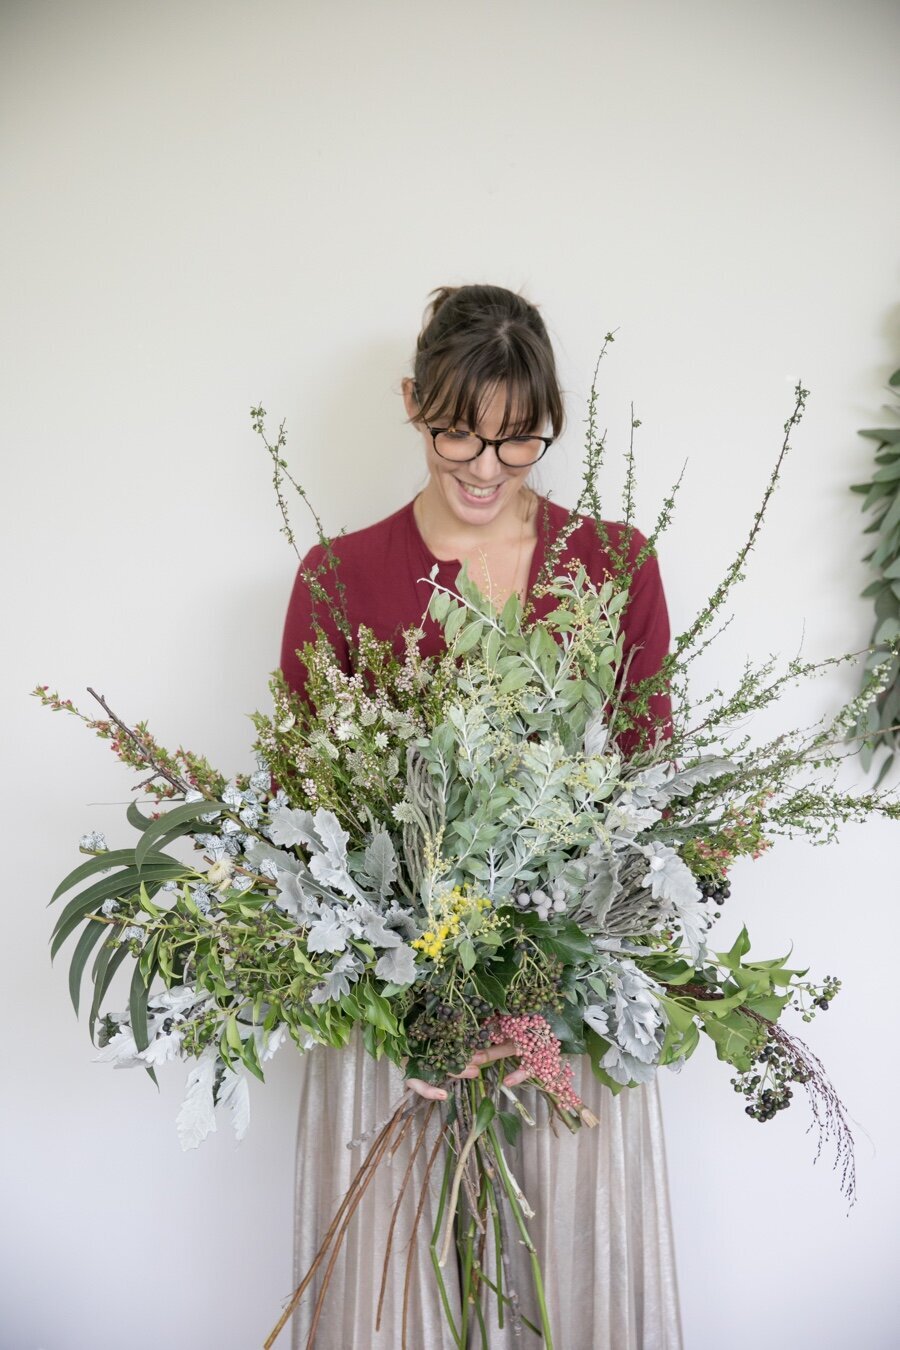 Woman holding large bouquet of wild flowers